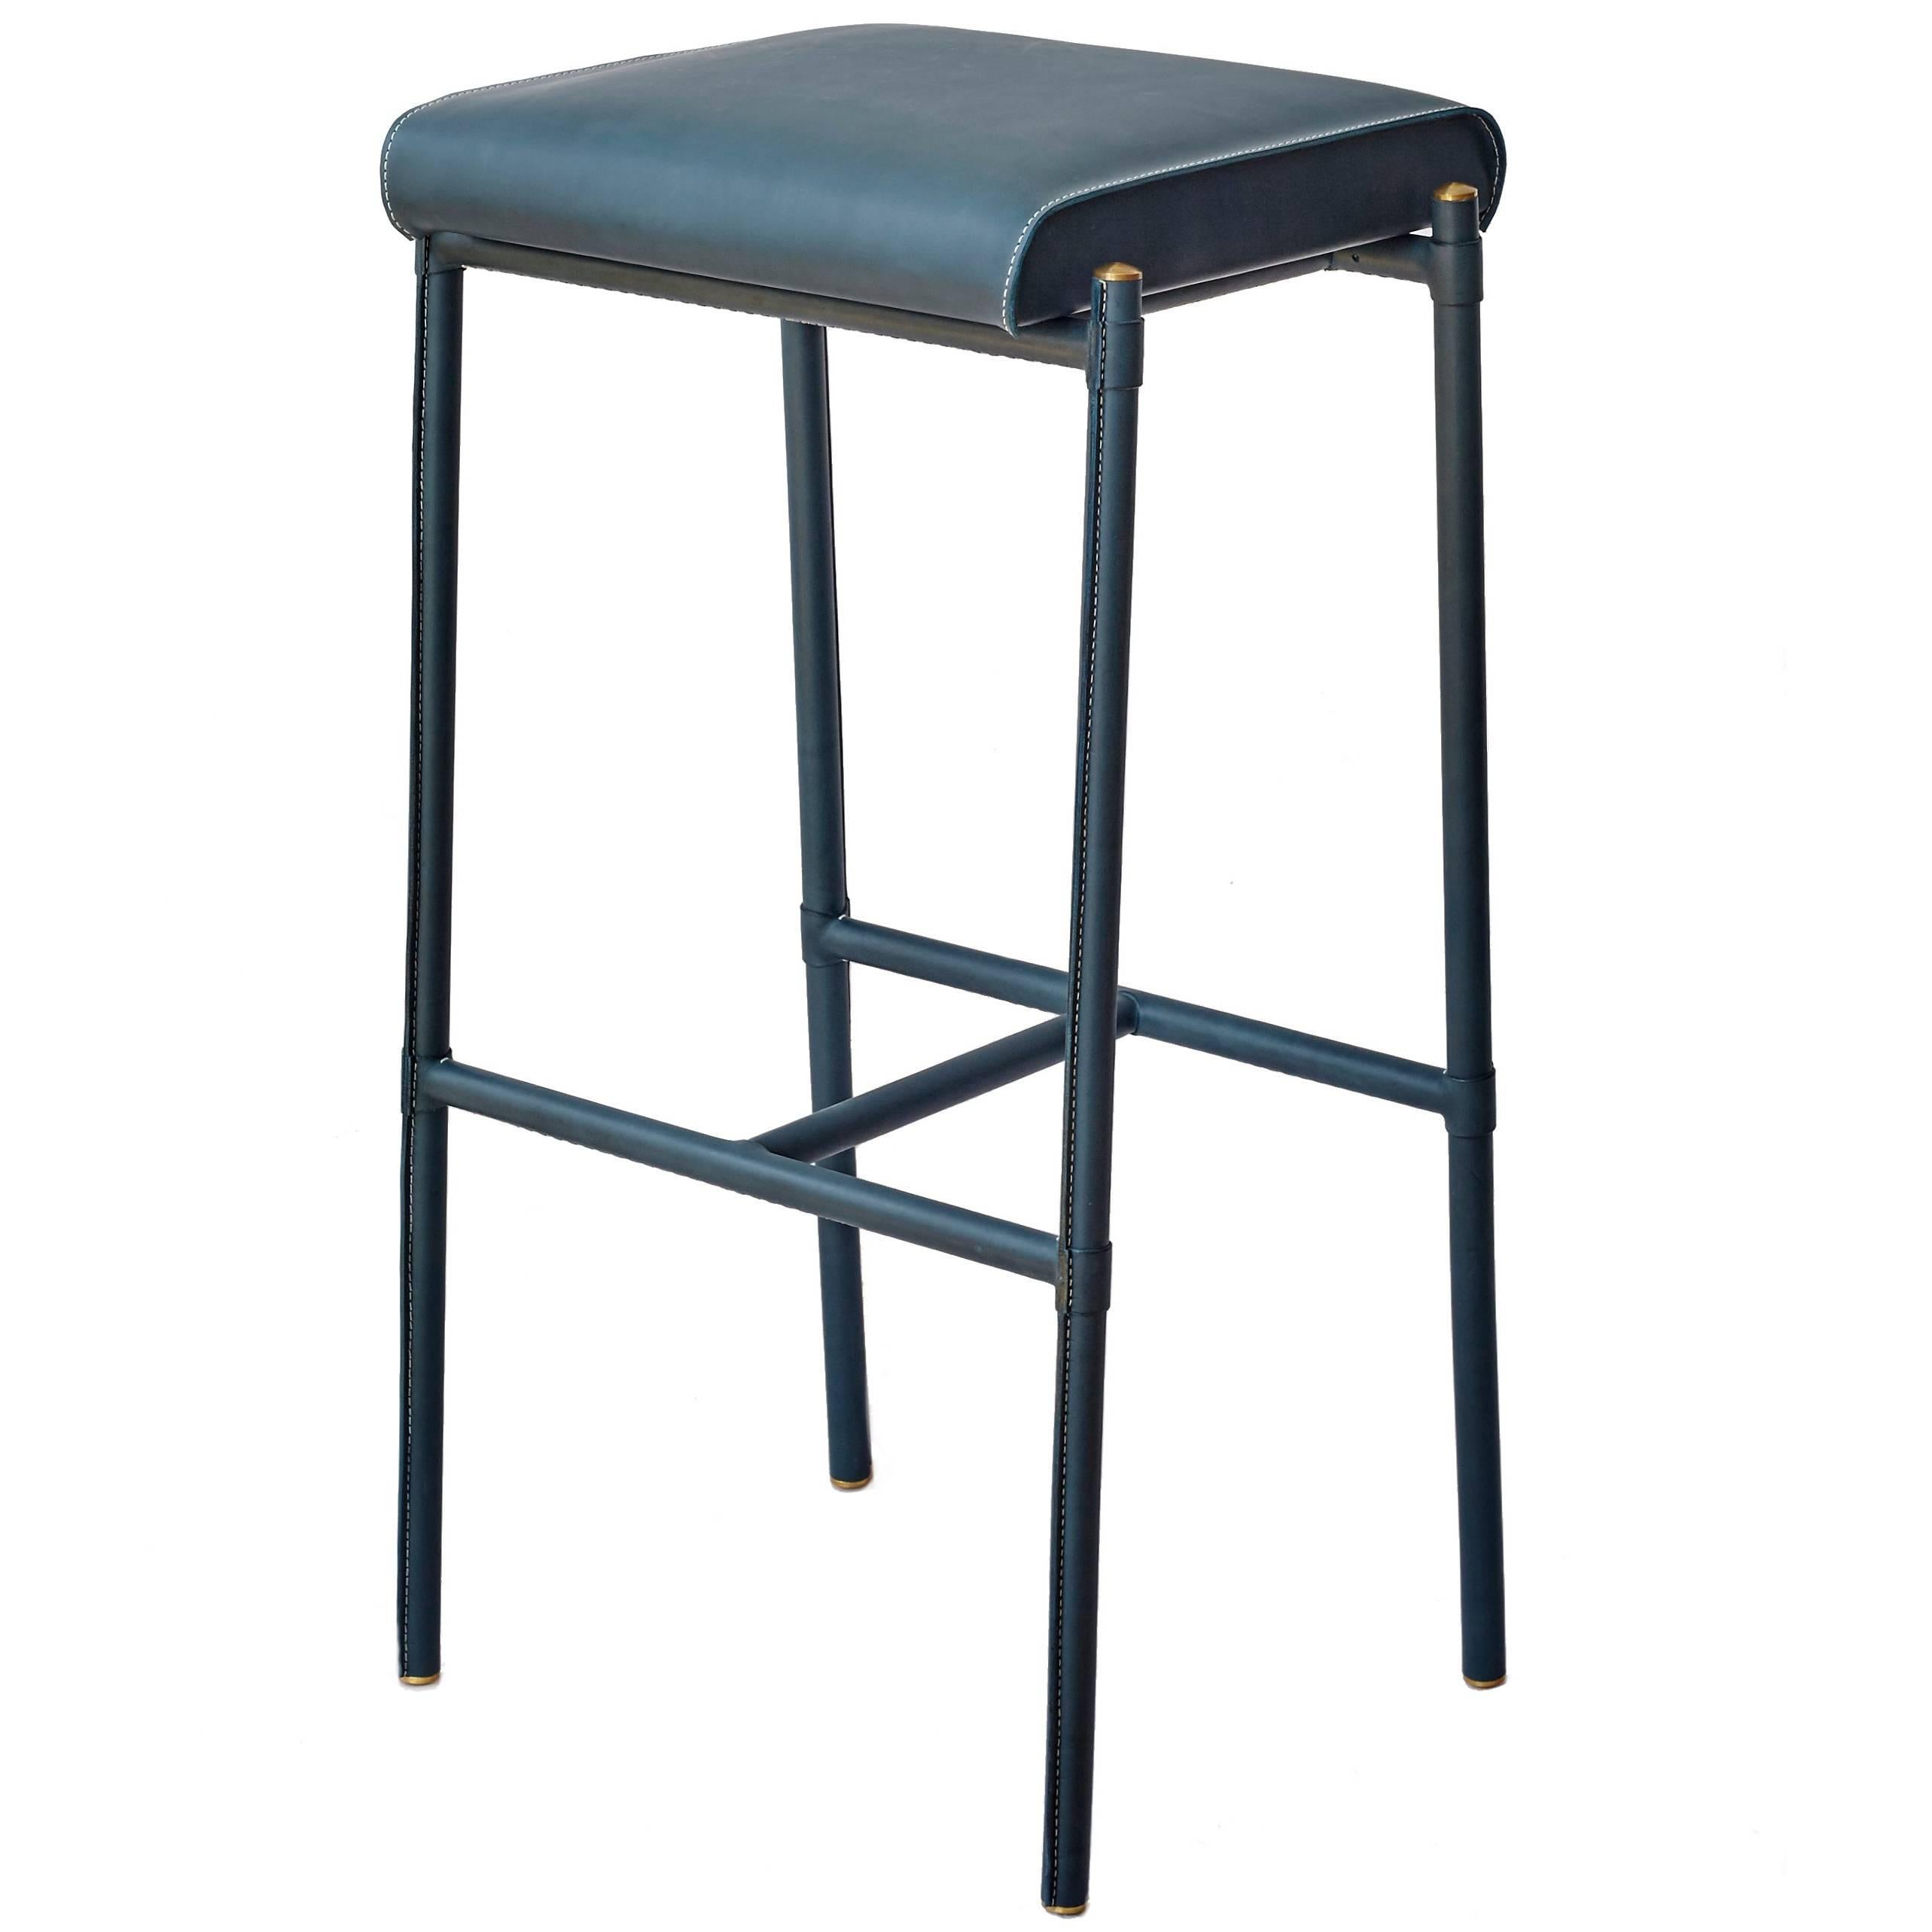 'Jacqueline' Bar Stool, Leather-Wrapped and Hand-Stitched, with Upholstered seat For Sale